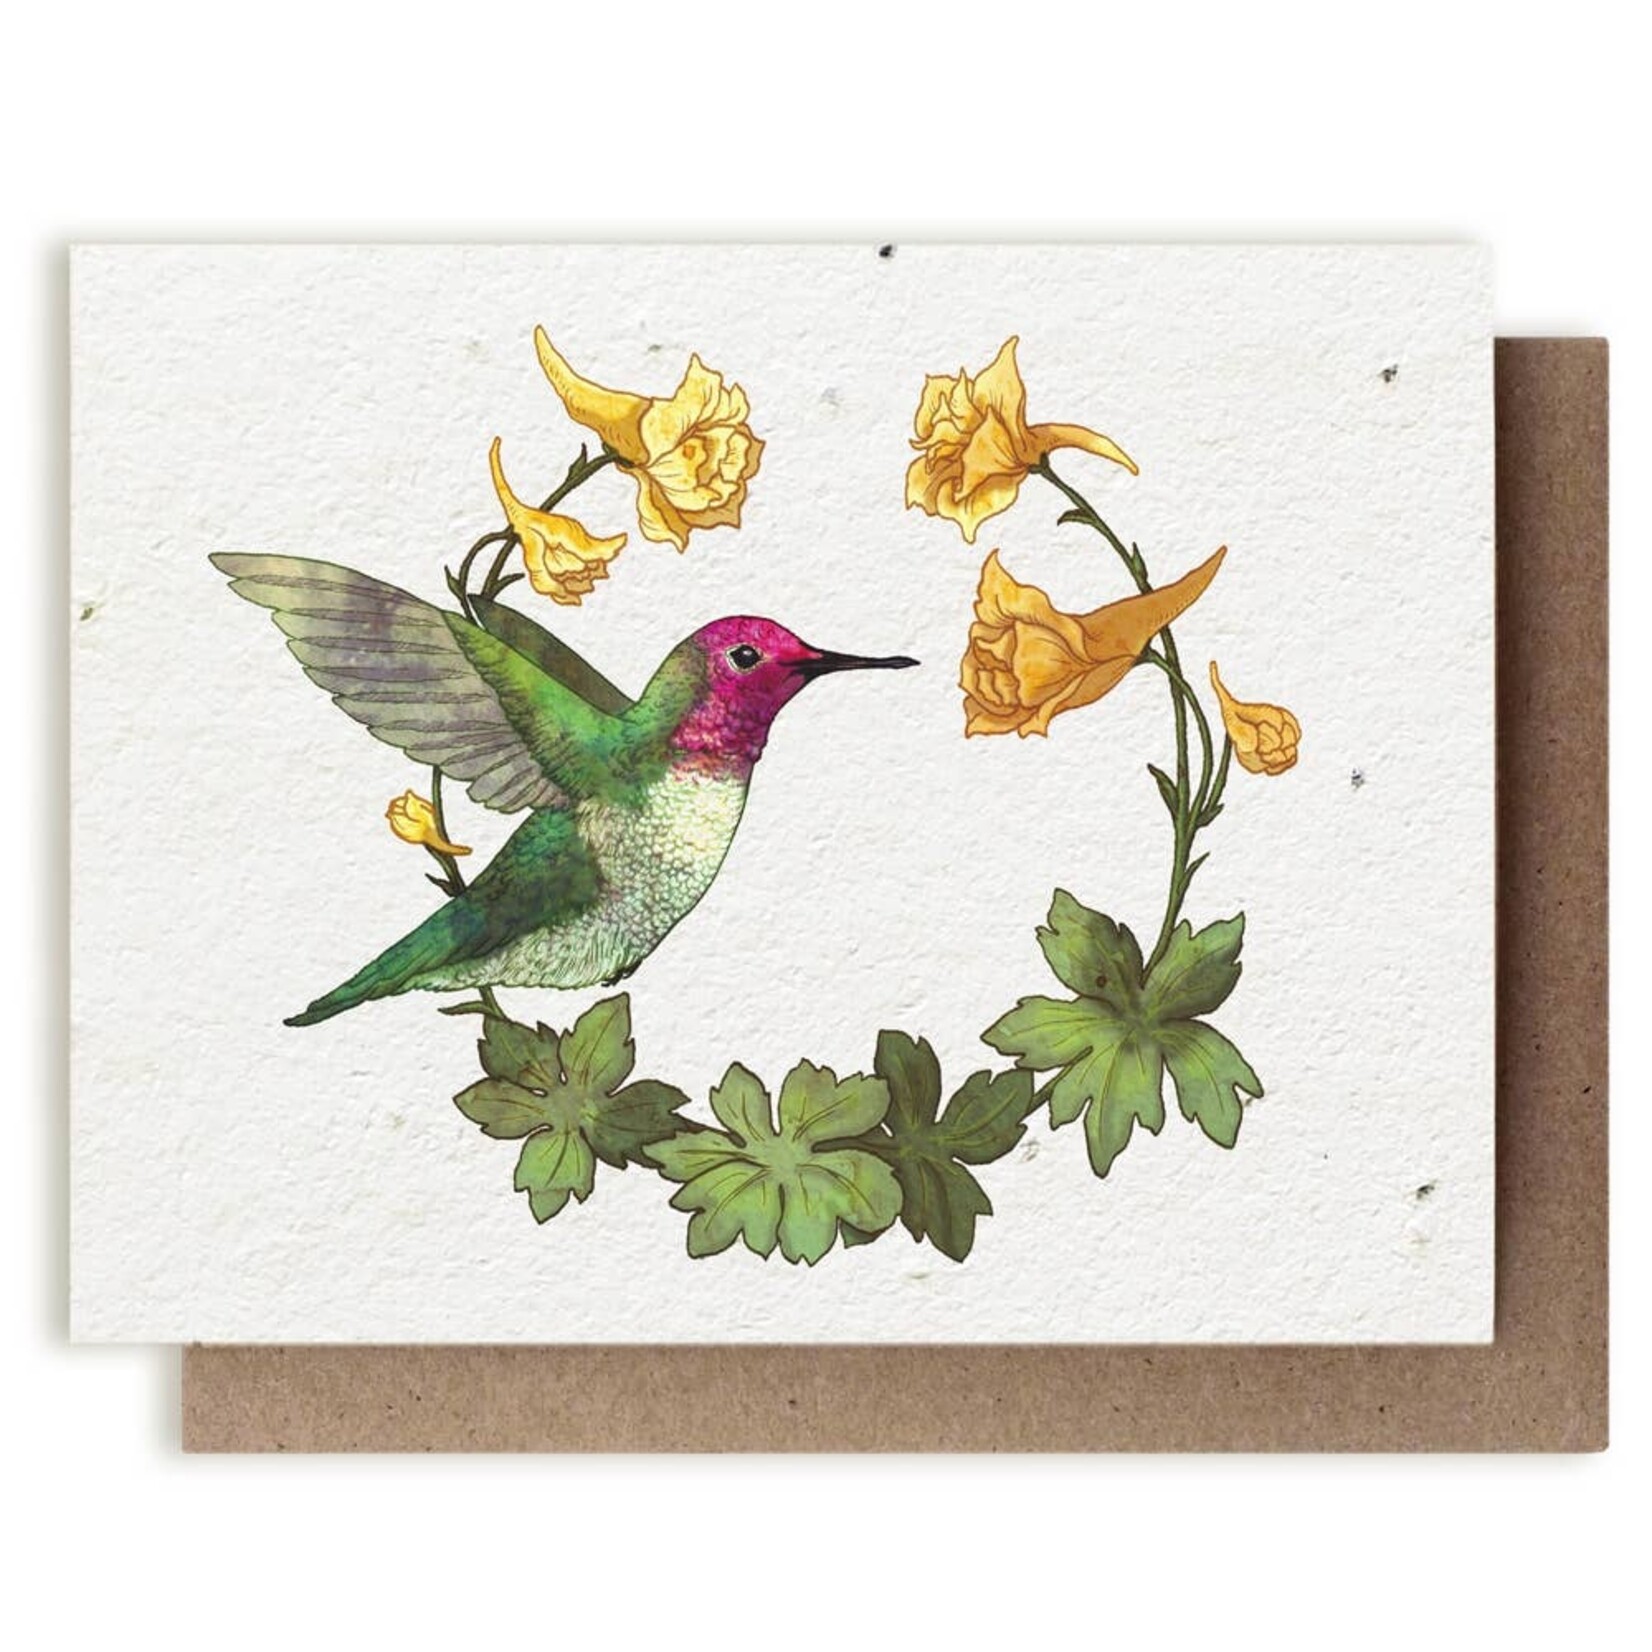 Small Victories Small Victories Anna's Hummingbird & Yellow Larkspur Plantable Herb Card